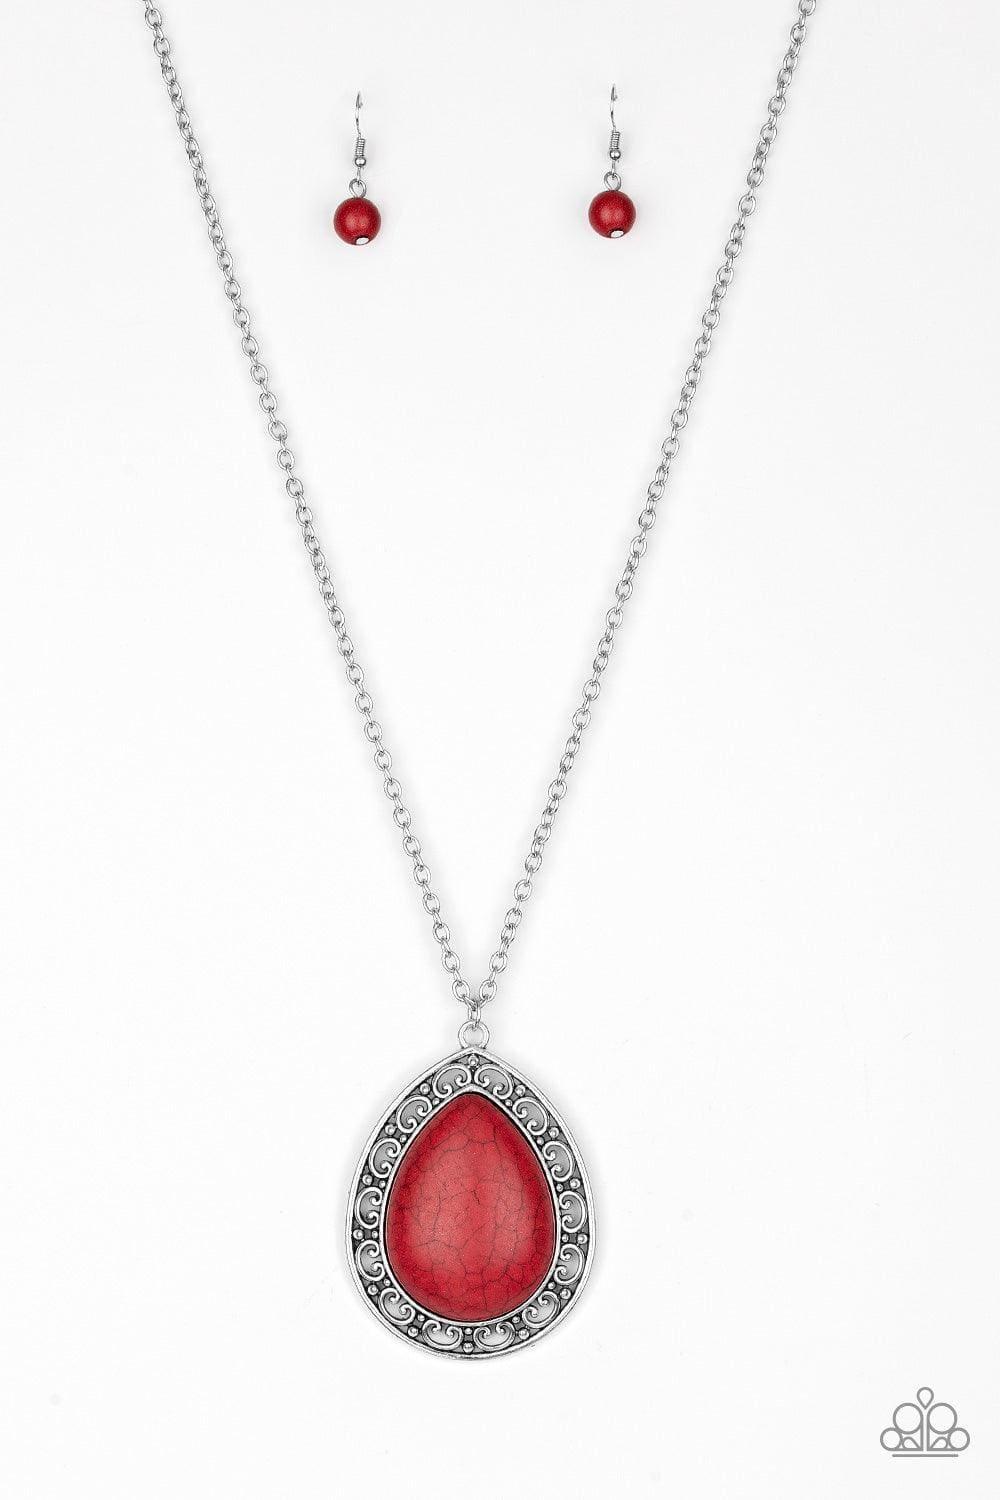 Paparazzi Accessories - Full Frontier - Red Necklace - Bling by JessieK